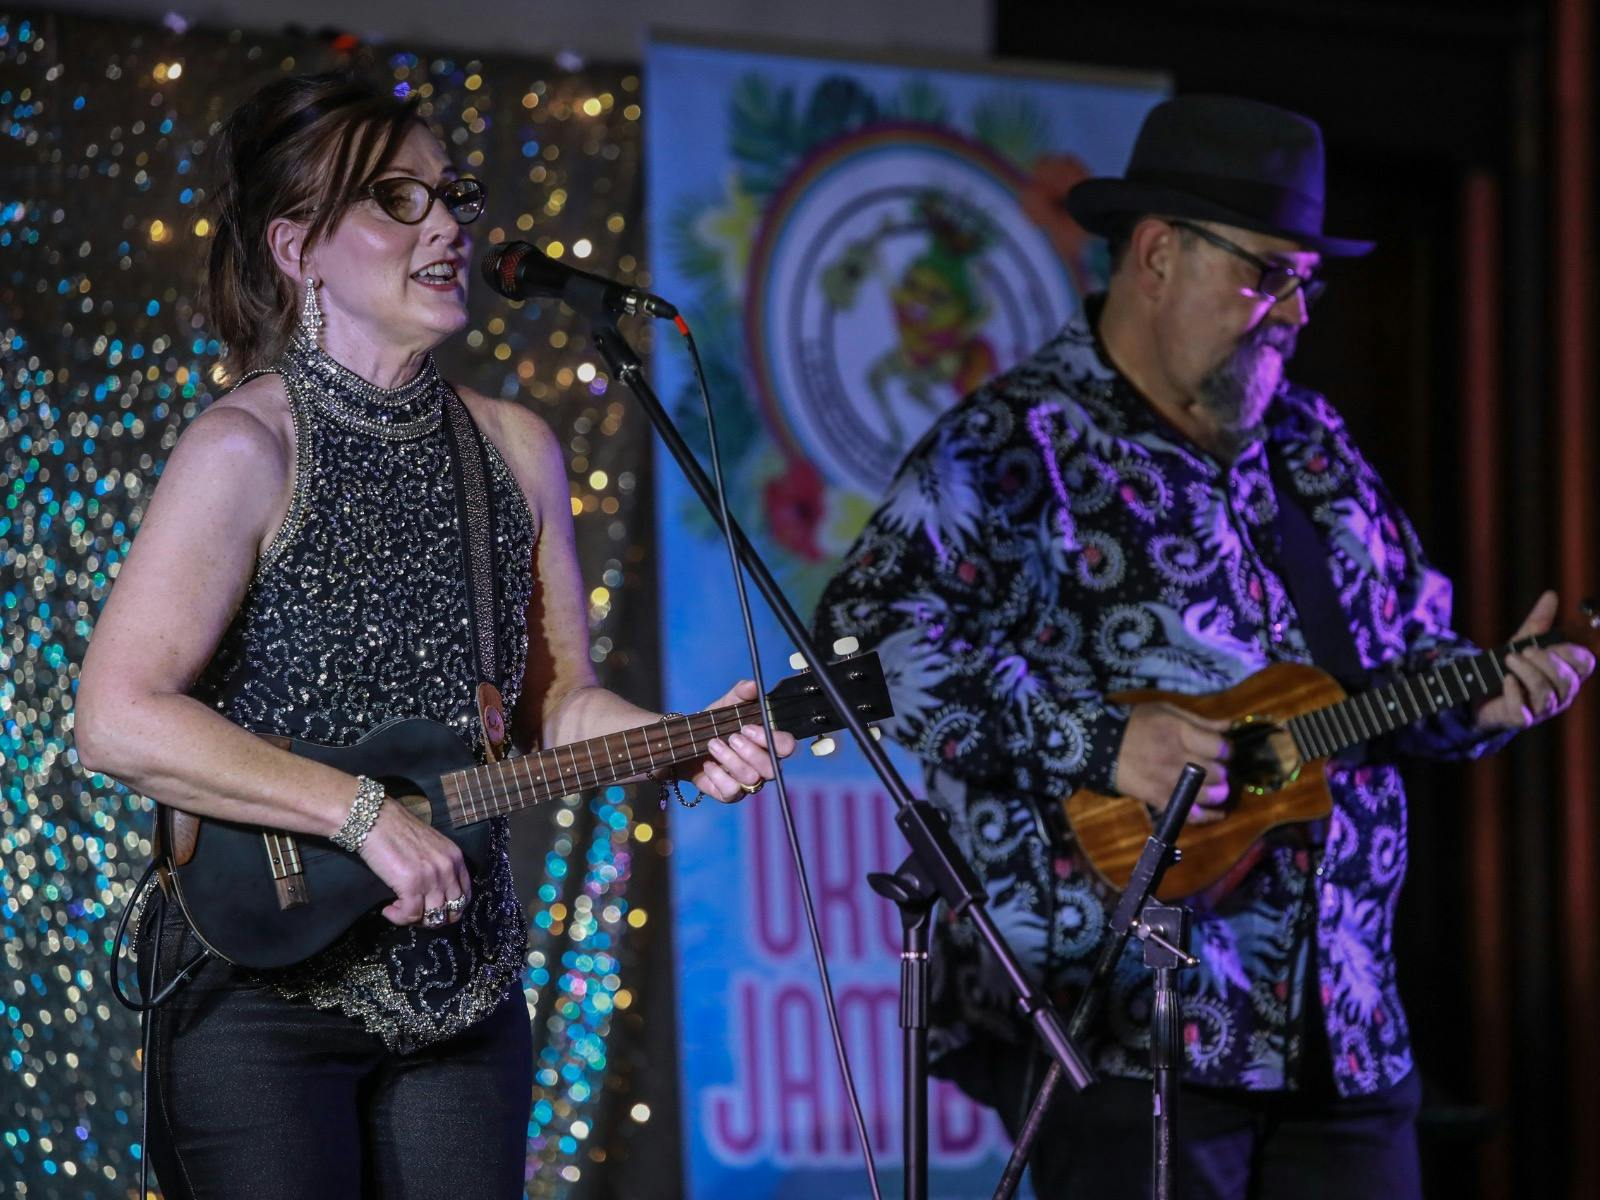 Ukulele duo in sparkly clothing against a glitter backdrop performing at evening concert.